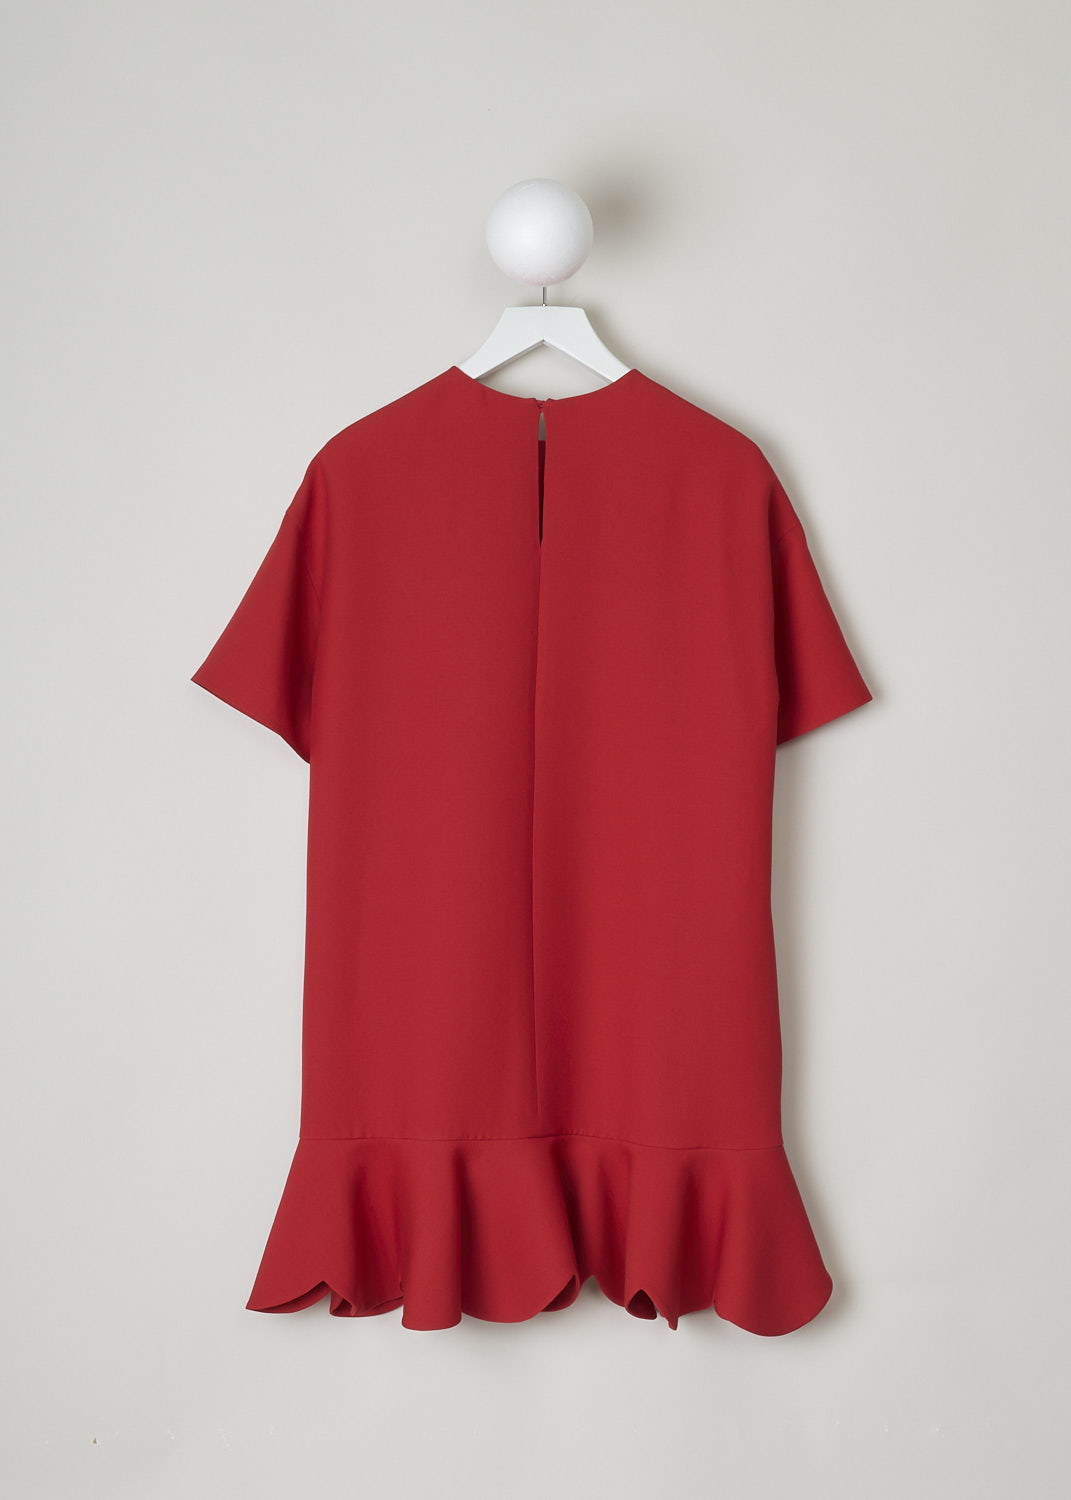 VALENTINO, RED SHORT SLEEVE DRESS WITH RUFFLES, SB3VAMV41CF_157, Red, Back, This red dress has a round neckline, short sleeves and a ruffed hemline. Slanted pockets can be found concealed within the seam. The dress has a wider silhouette. In the back, a single button functions as the closure option. 
